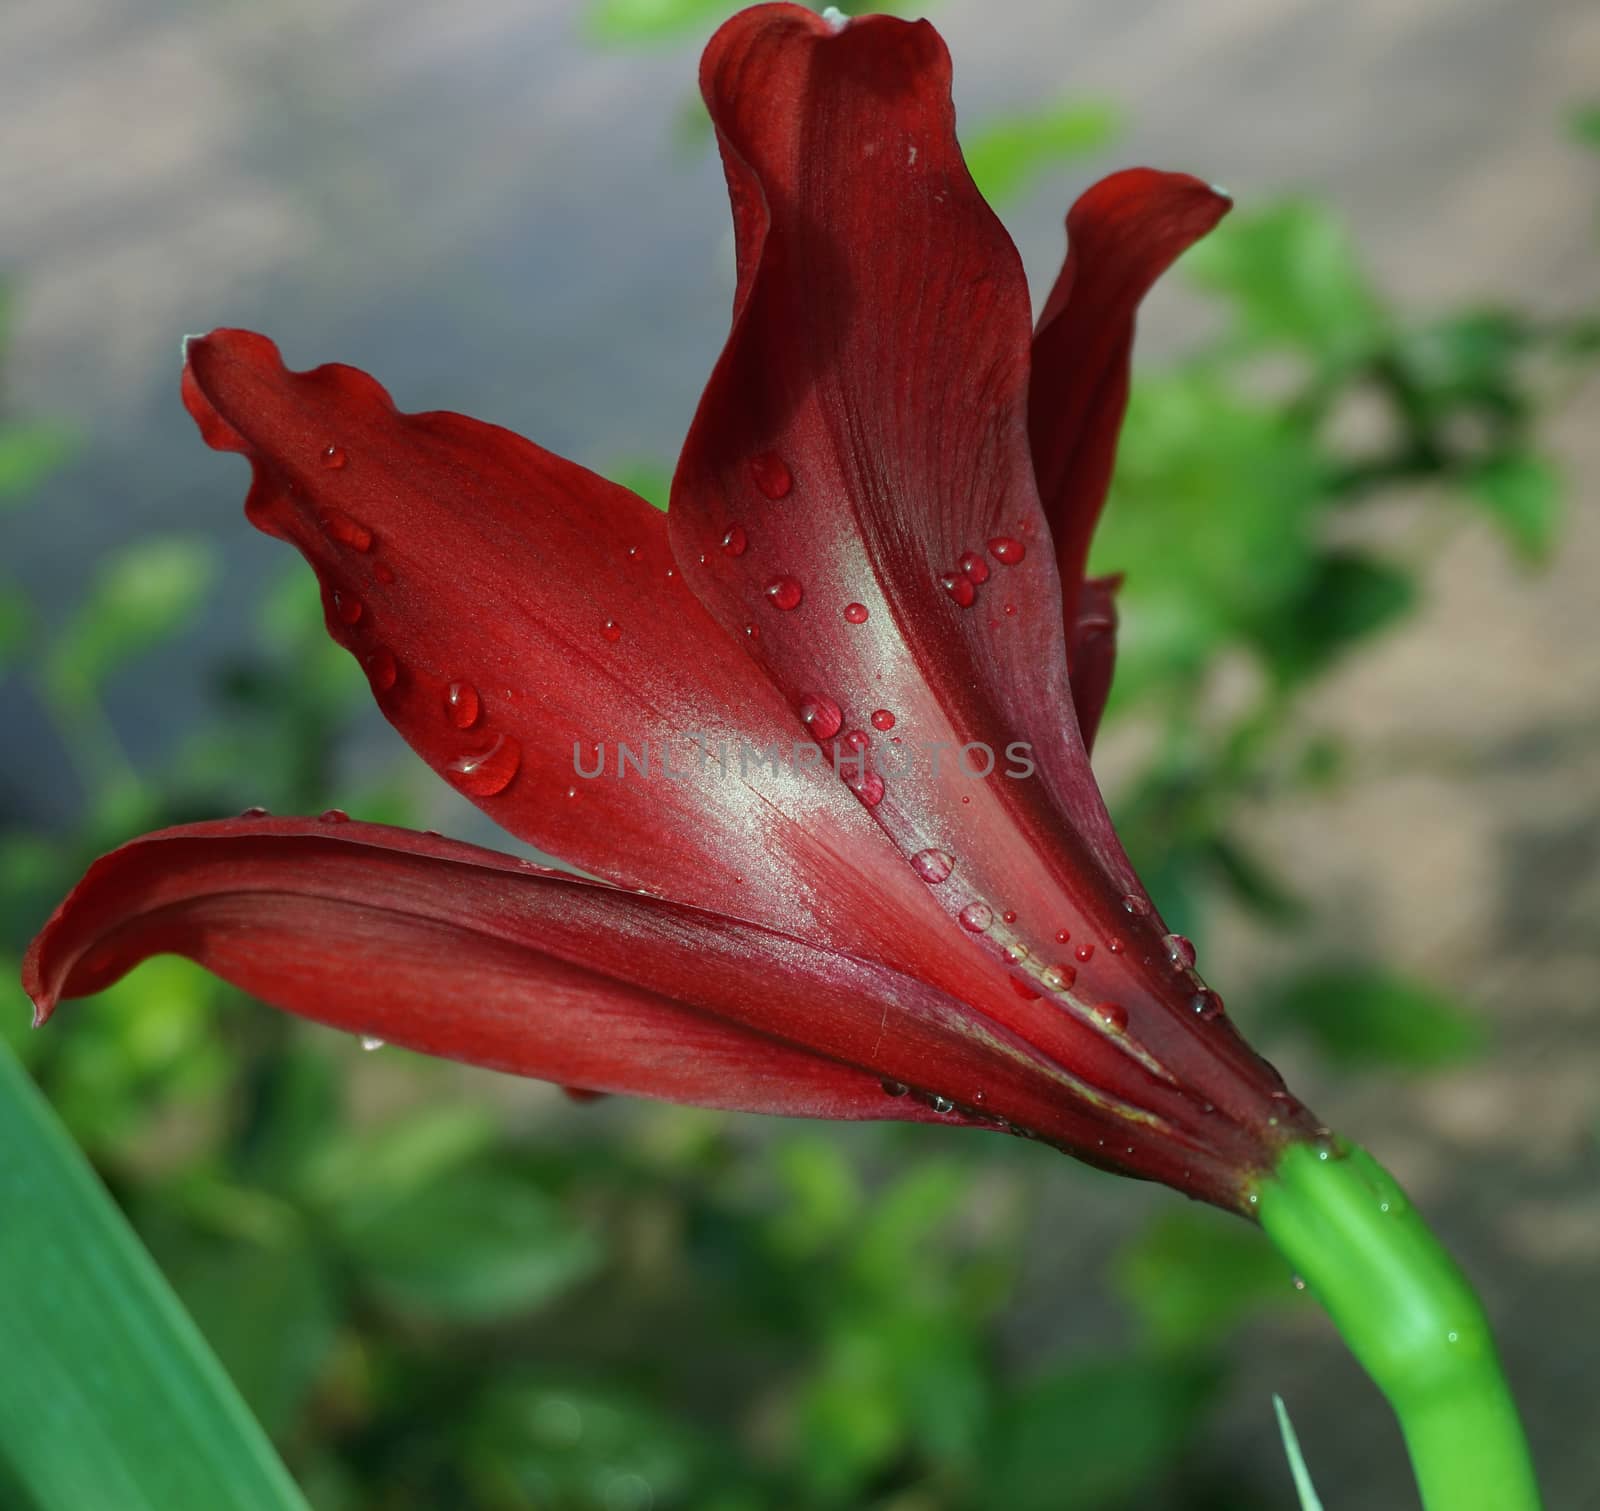 Hippeastrum full bloom, photographed from the side see the beauty pretty slick, bright colors of the flowers clearly.                              